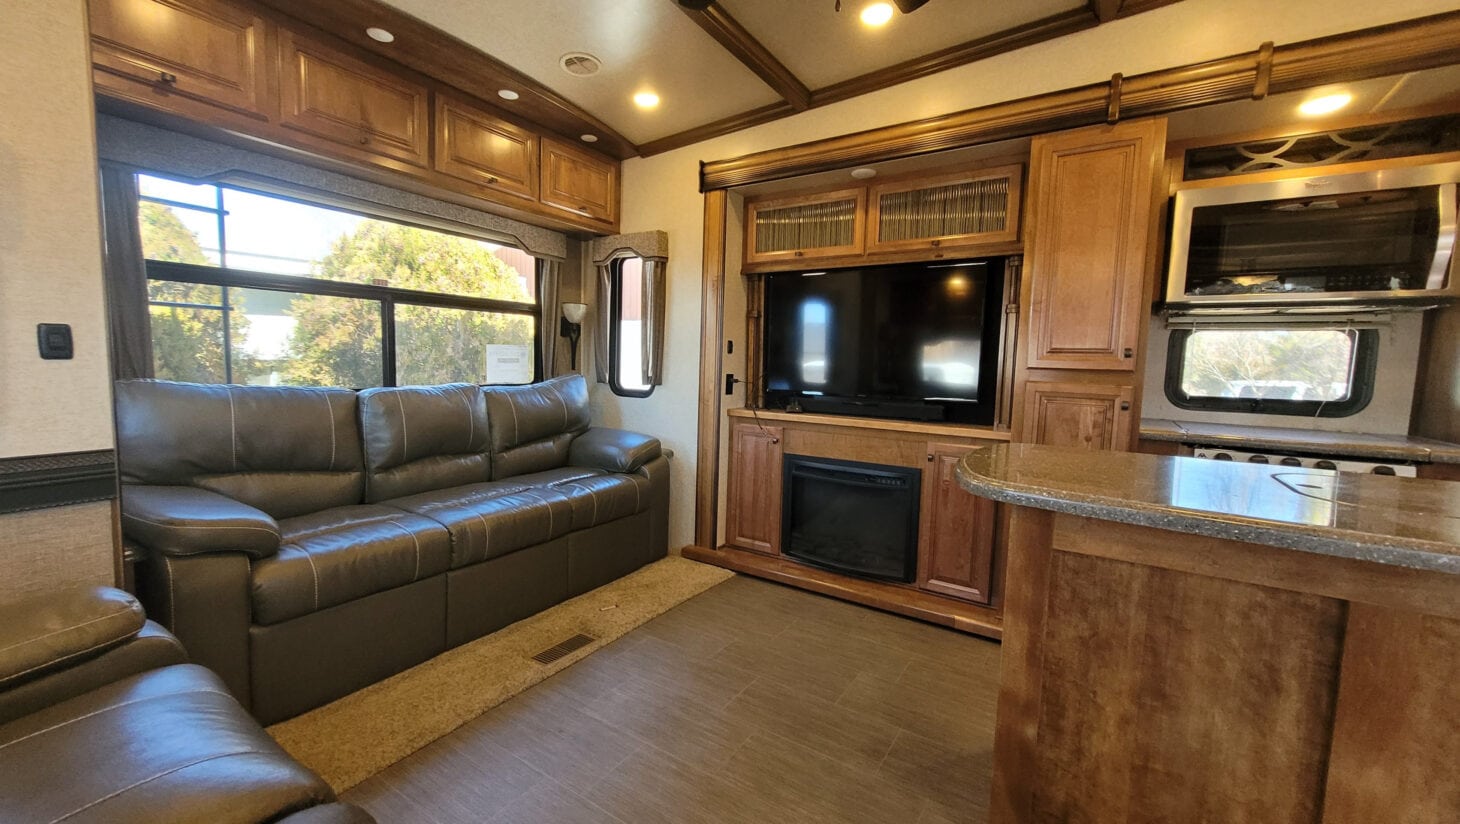 the interior of an RV with a brown leather couch and wooden cabinets